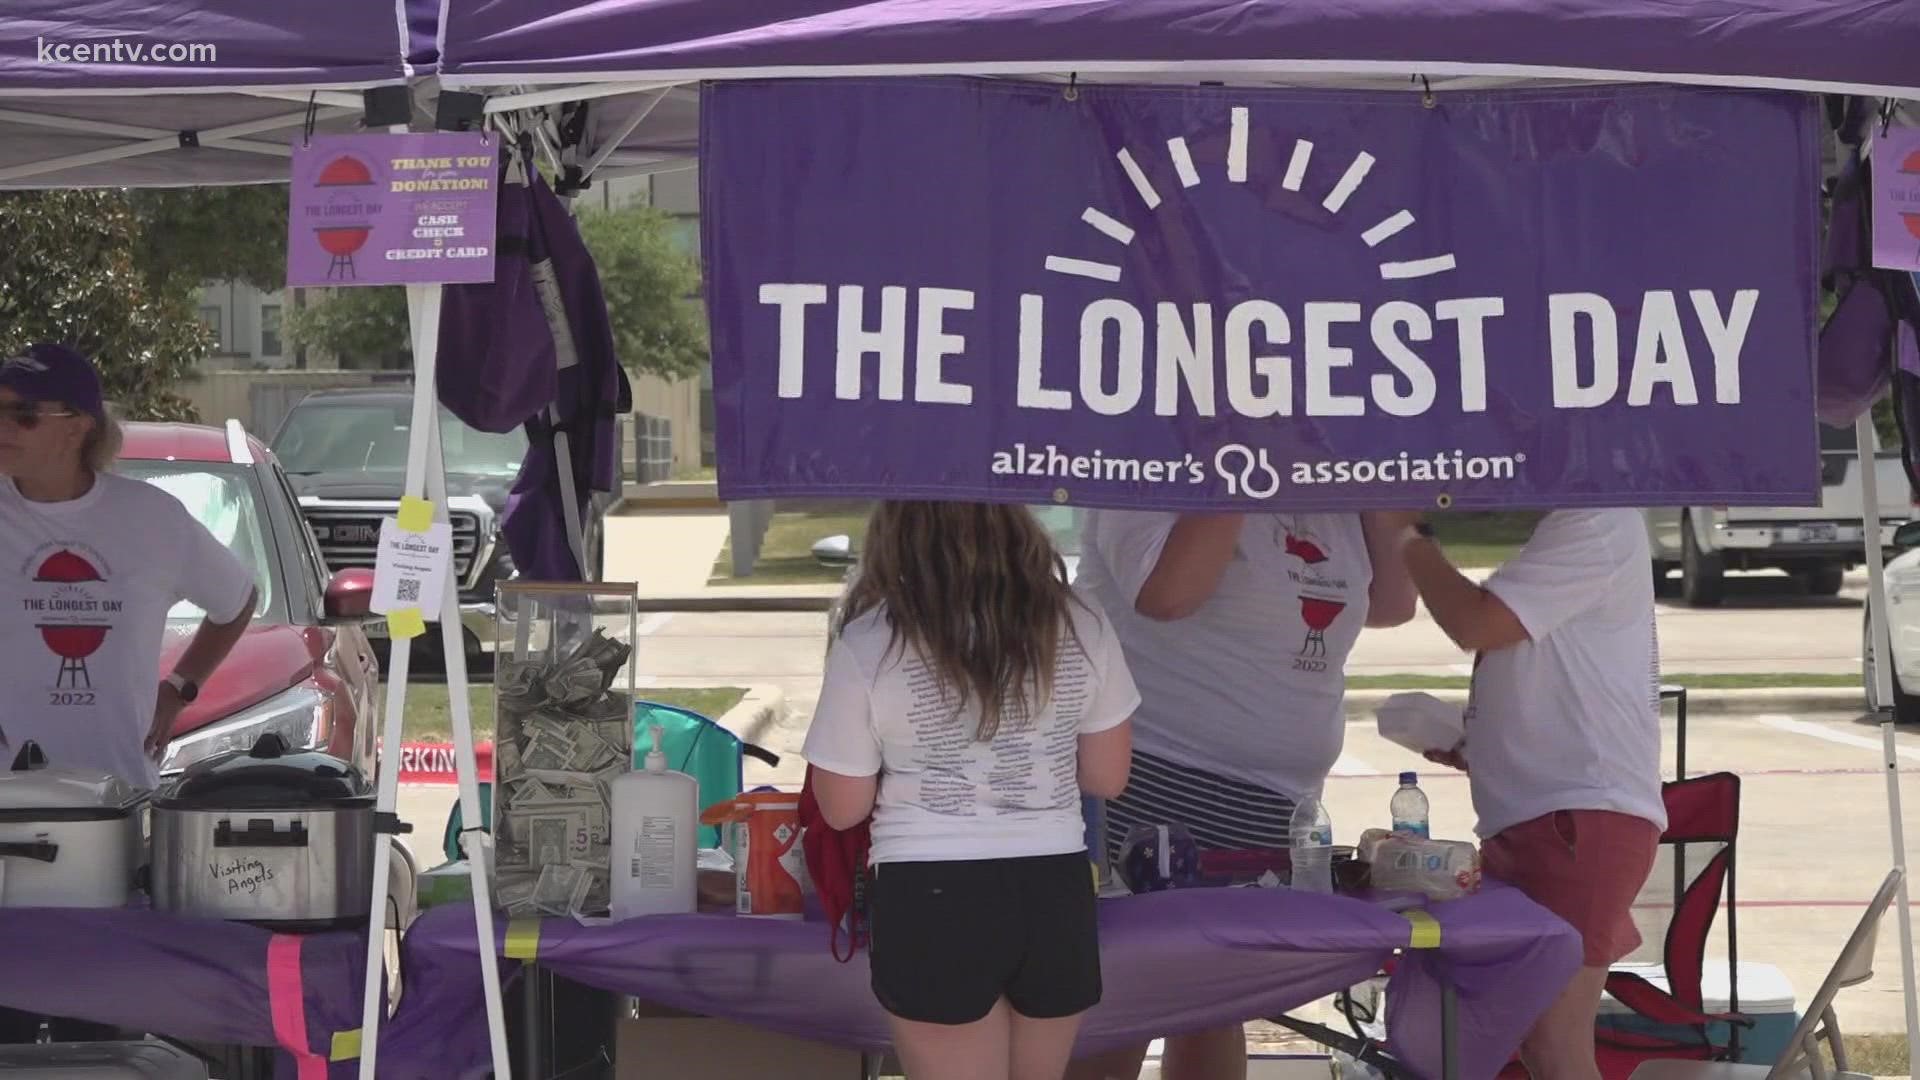 The Alzheimer's Angels held their annual cookout from sun up to sun down, in order to raise awareness for Alzheimer's. Donations go to the Alzheimer's Association.